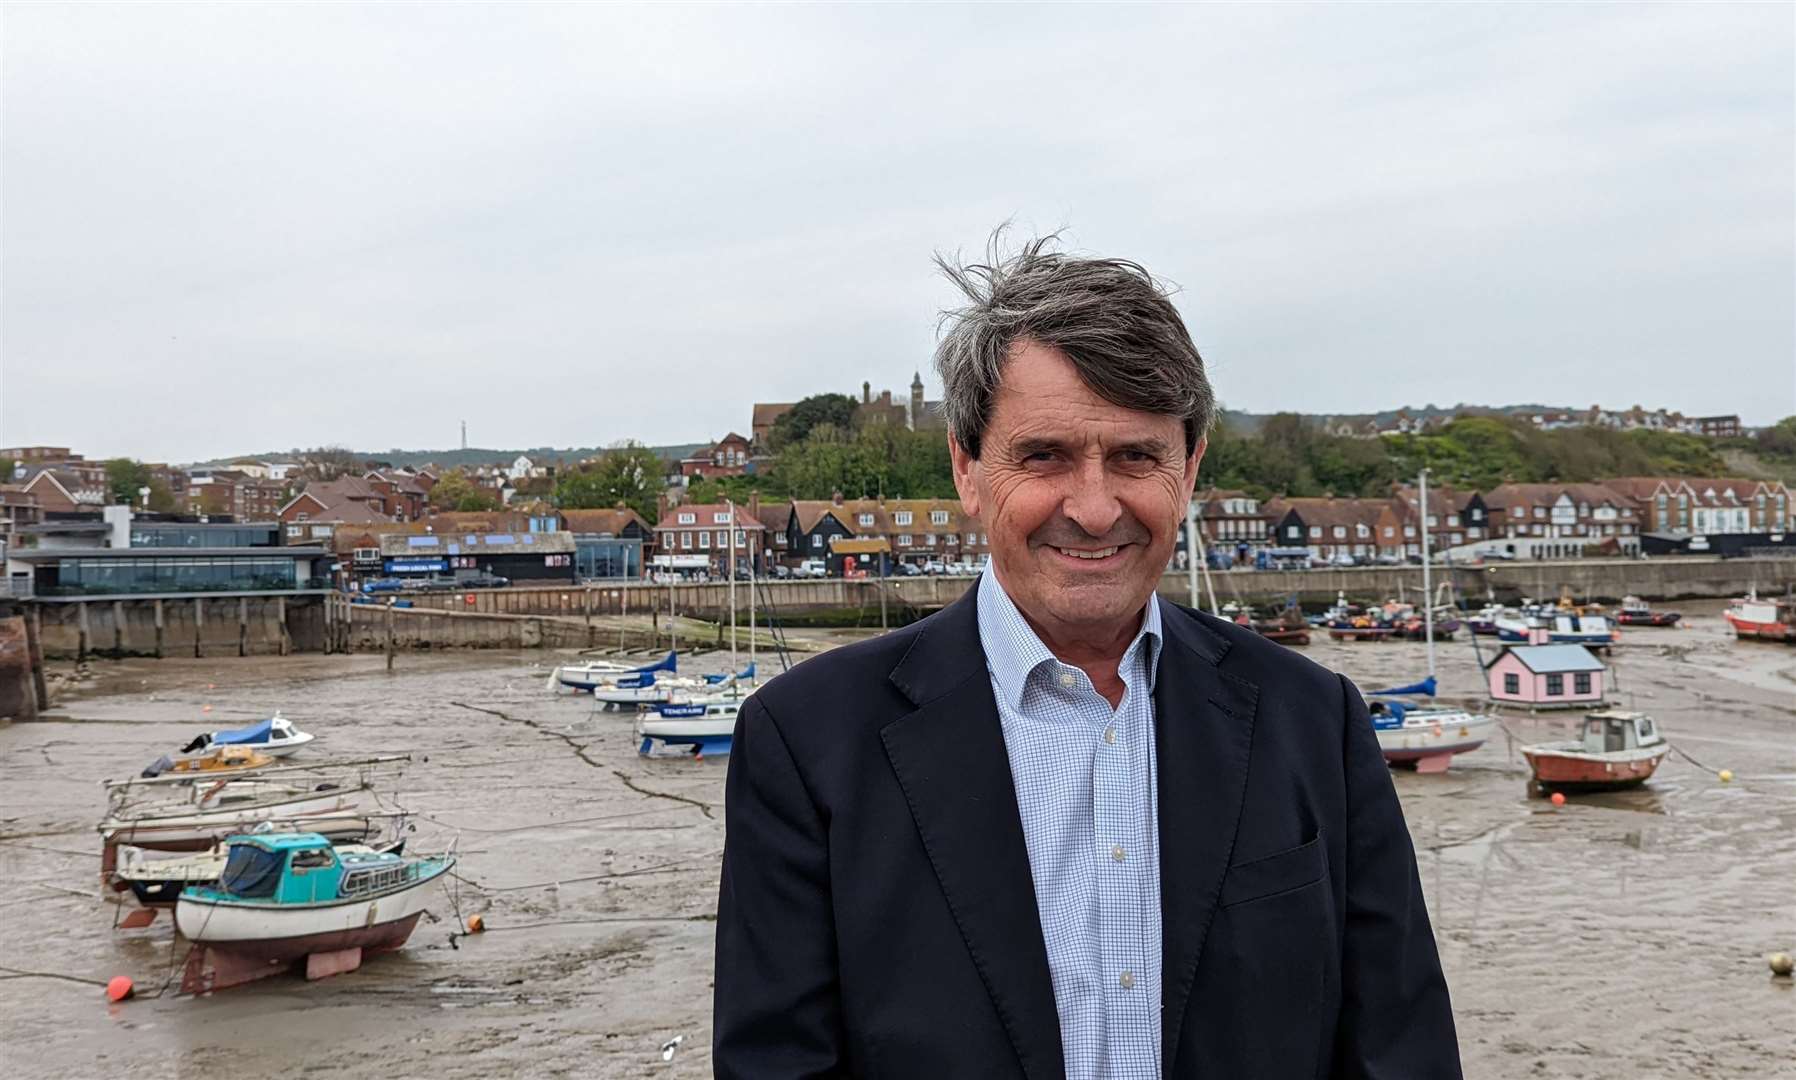 Trevor Minter is a director of the Folkestone Harbour & Seafront Development Company